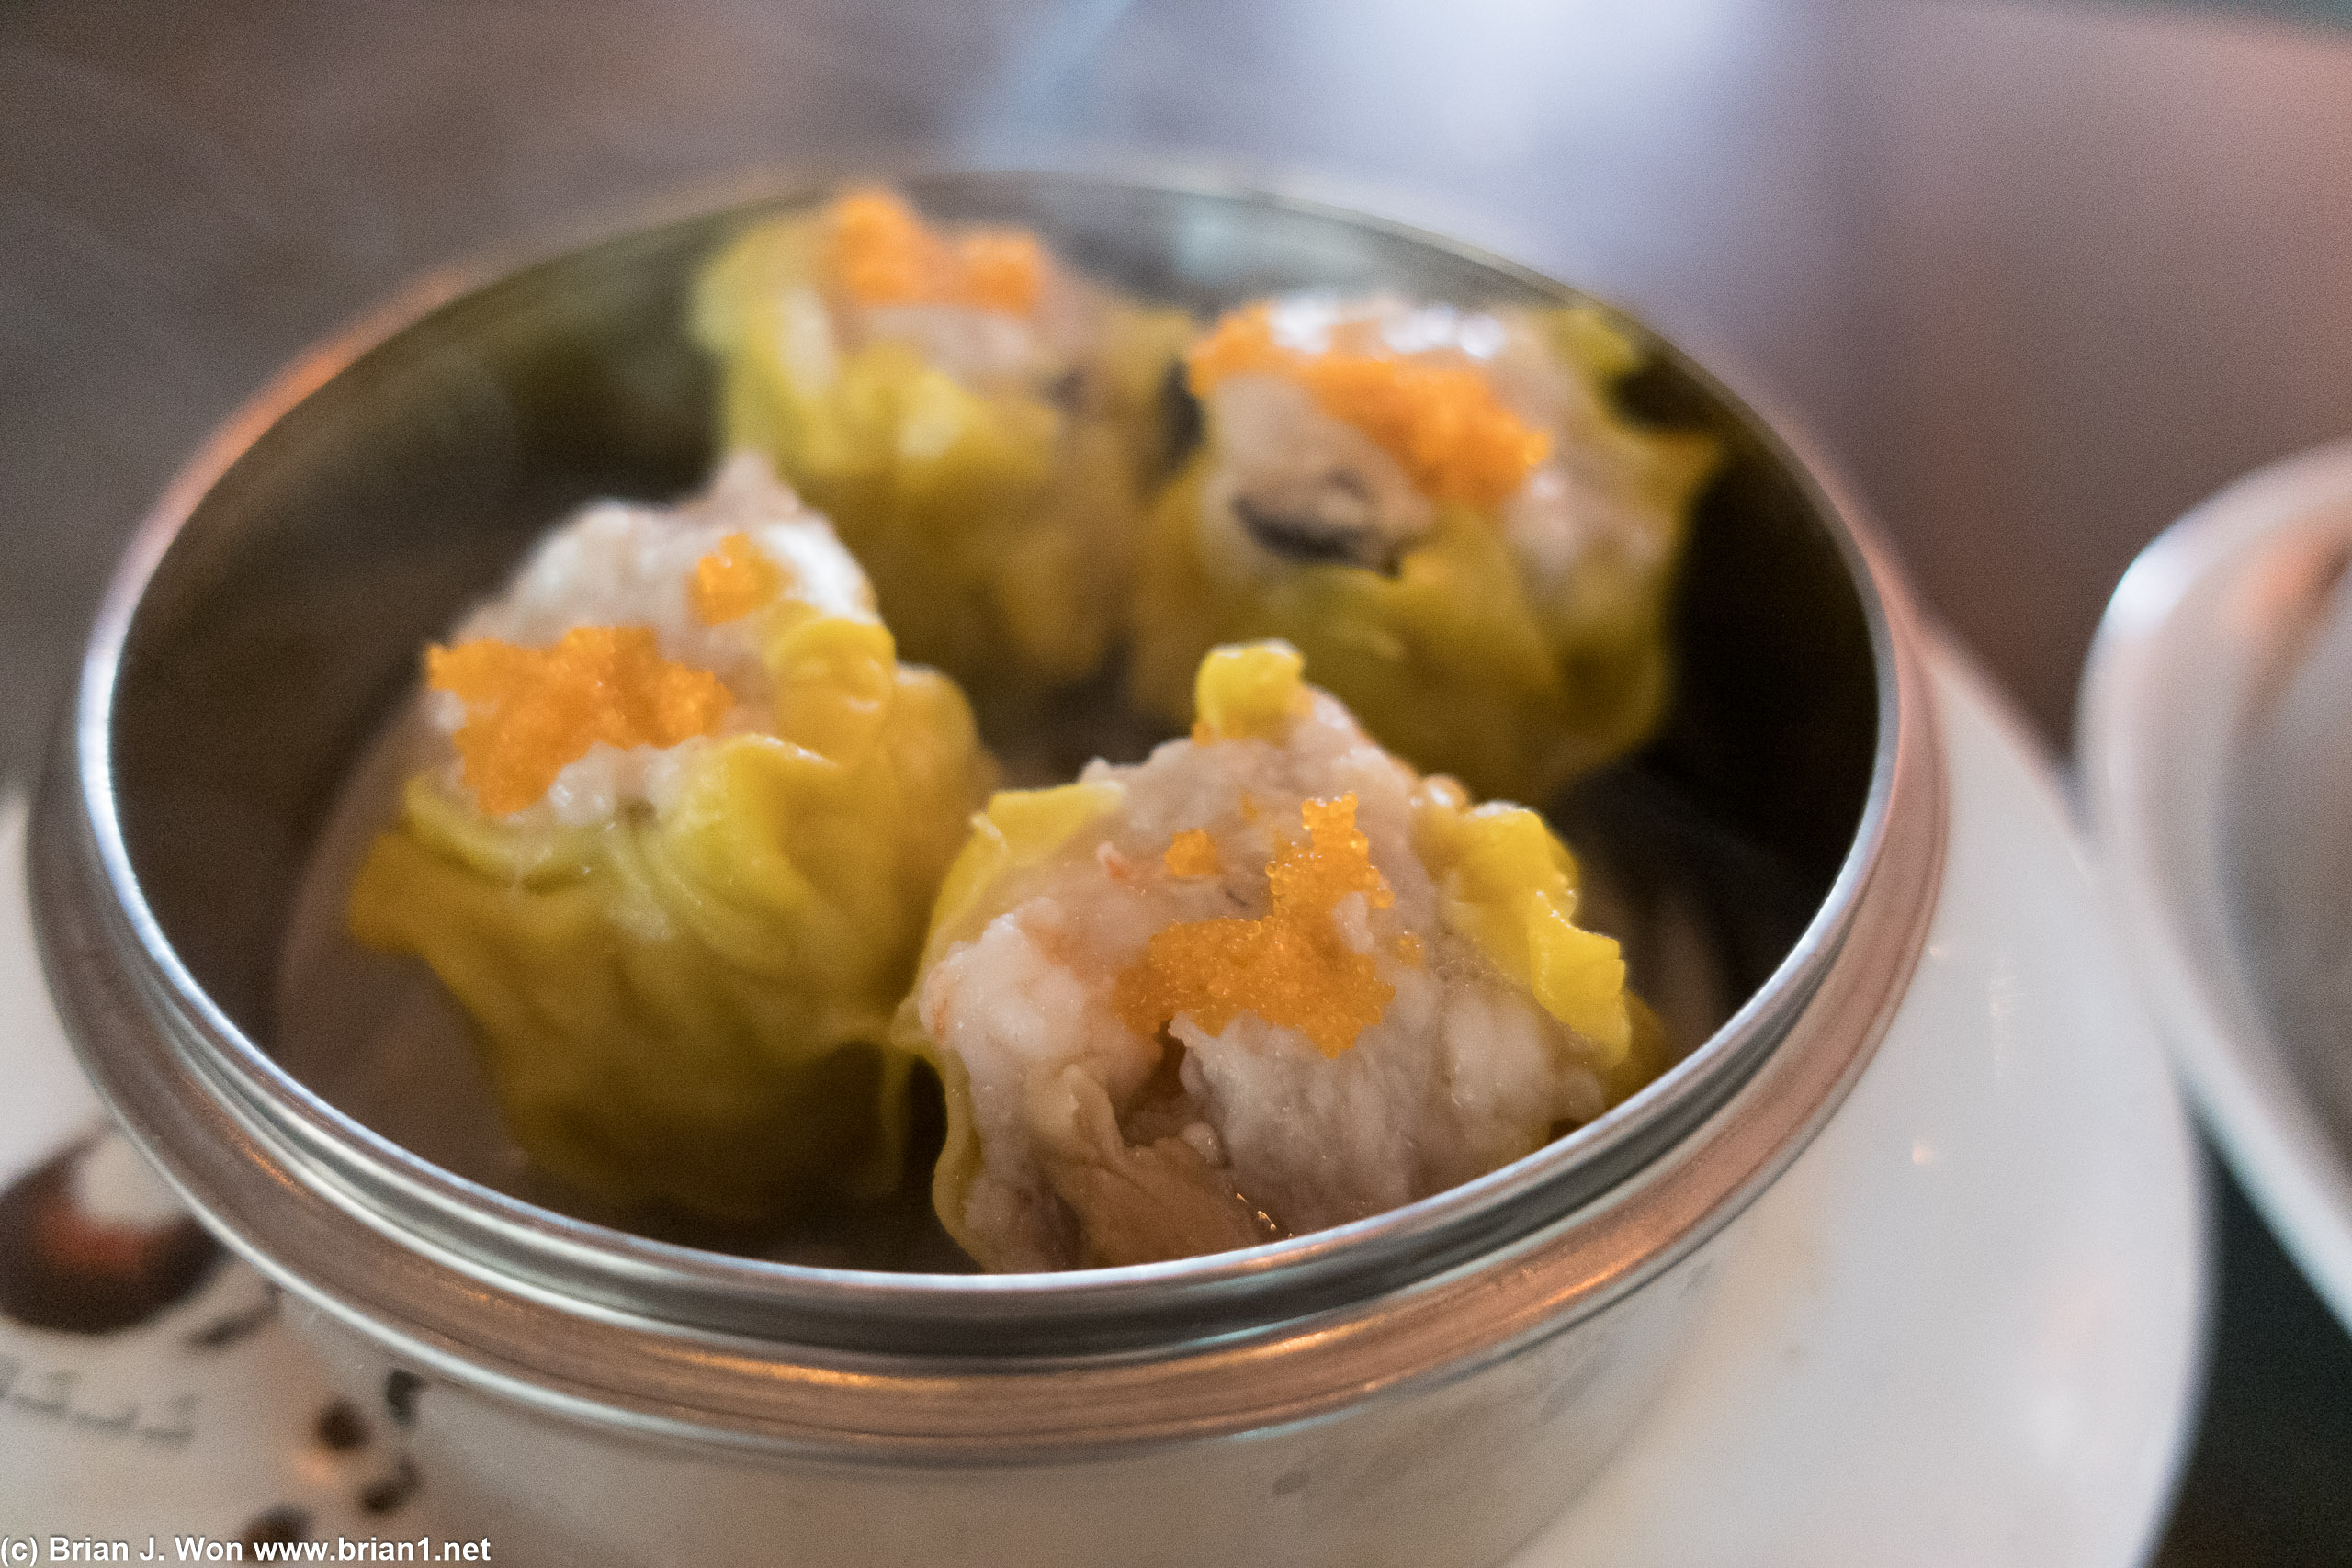 Shu mai were on the fatter side but not too ridiculous.